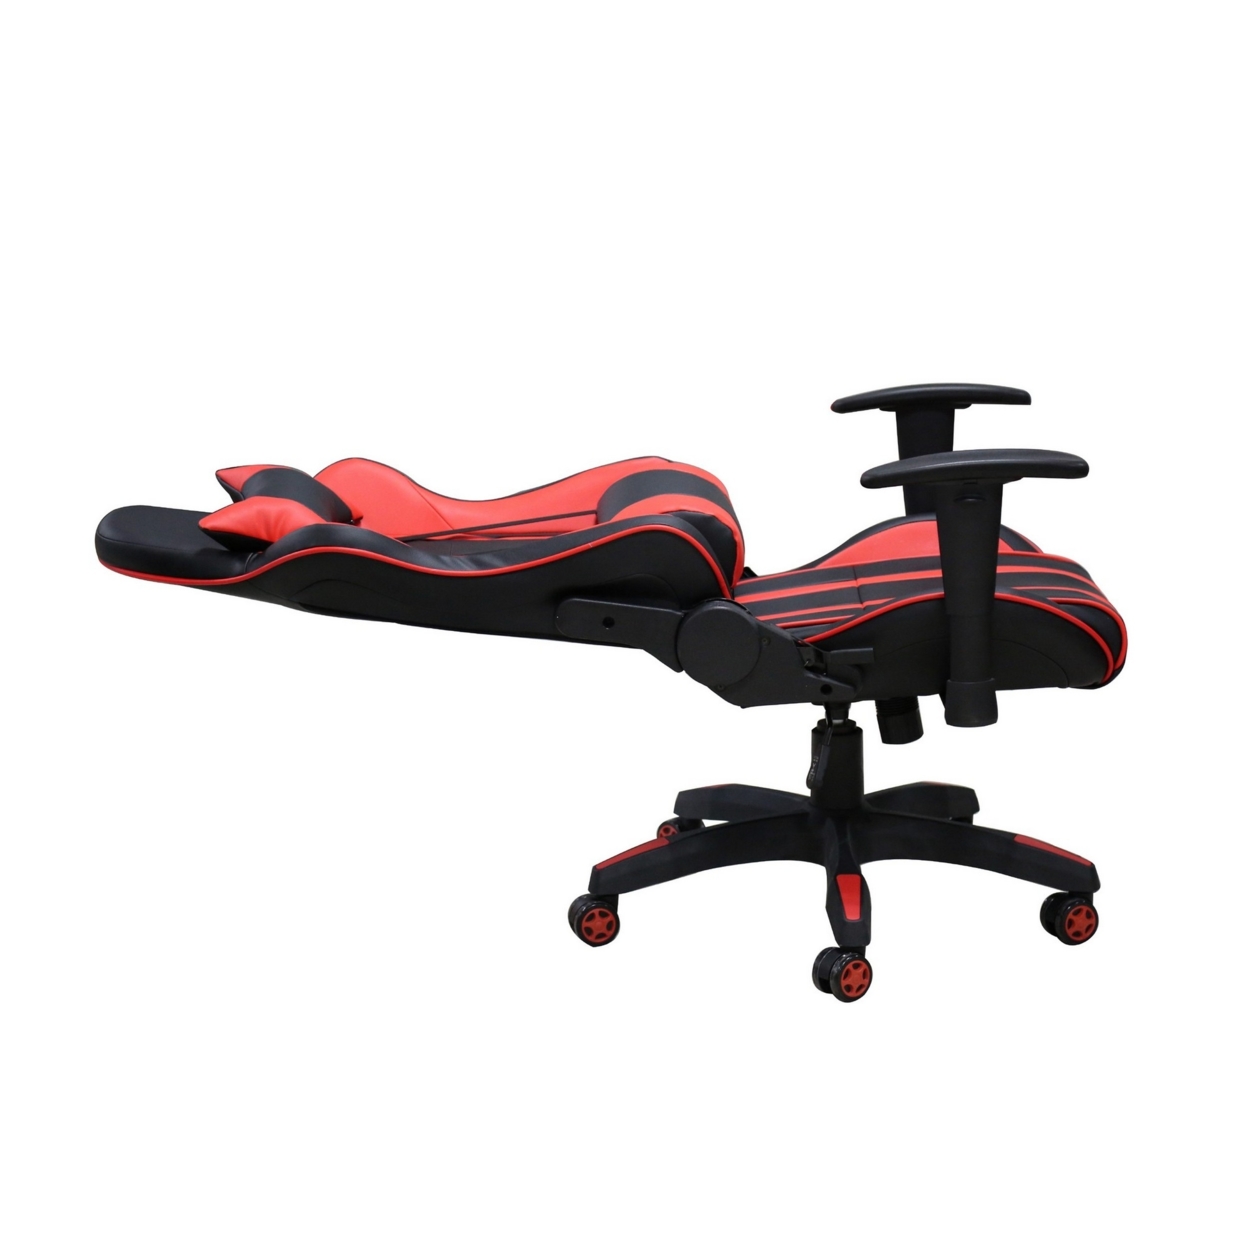 22 Inch Office Gaming Chair, Red, Black Faux Leather With Back Pillows- Saltoro Sherpi